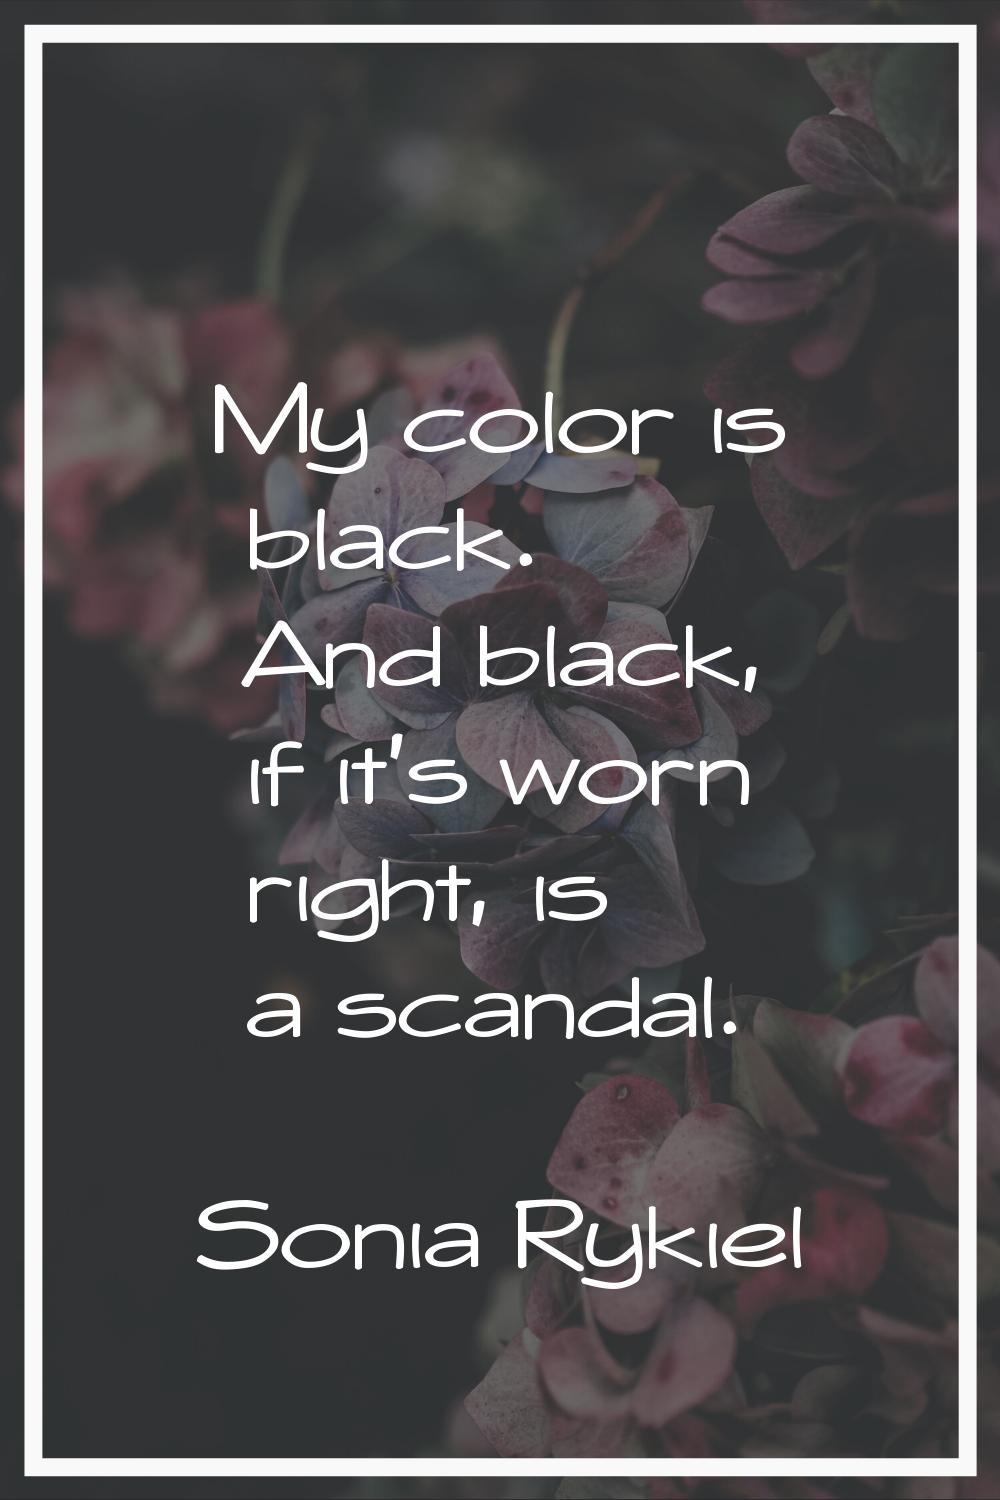 My color is black. And black, if it's worn right, is a scandal.